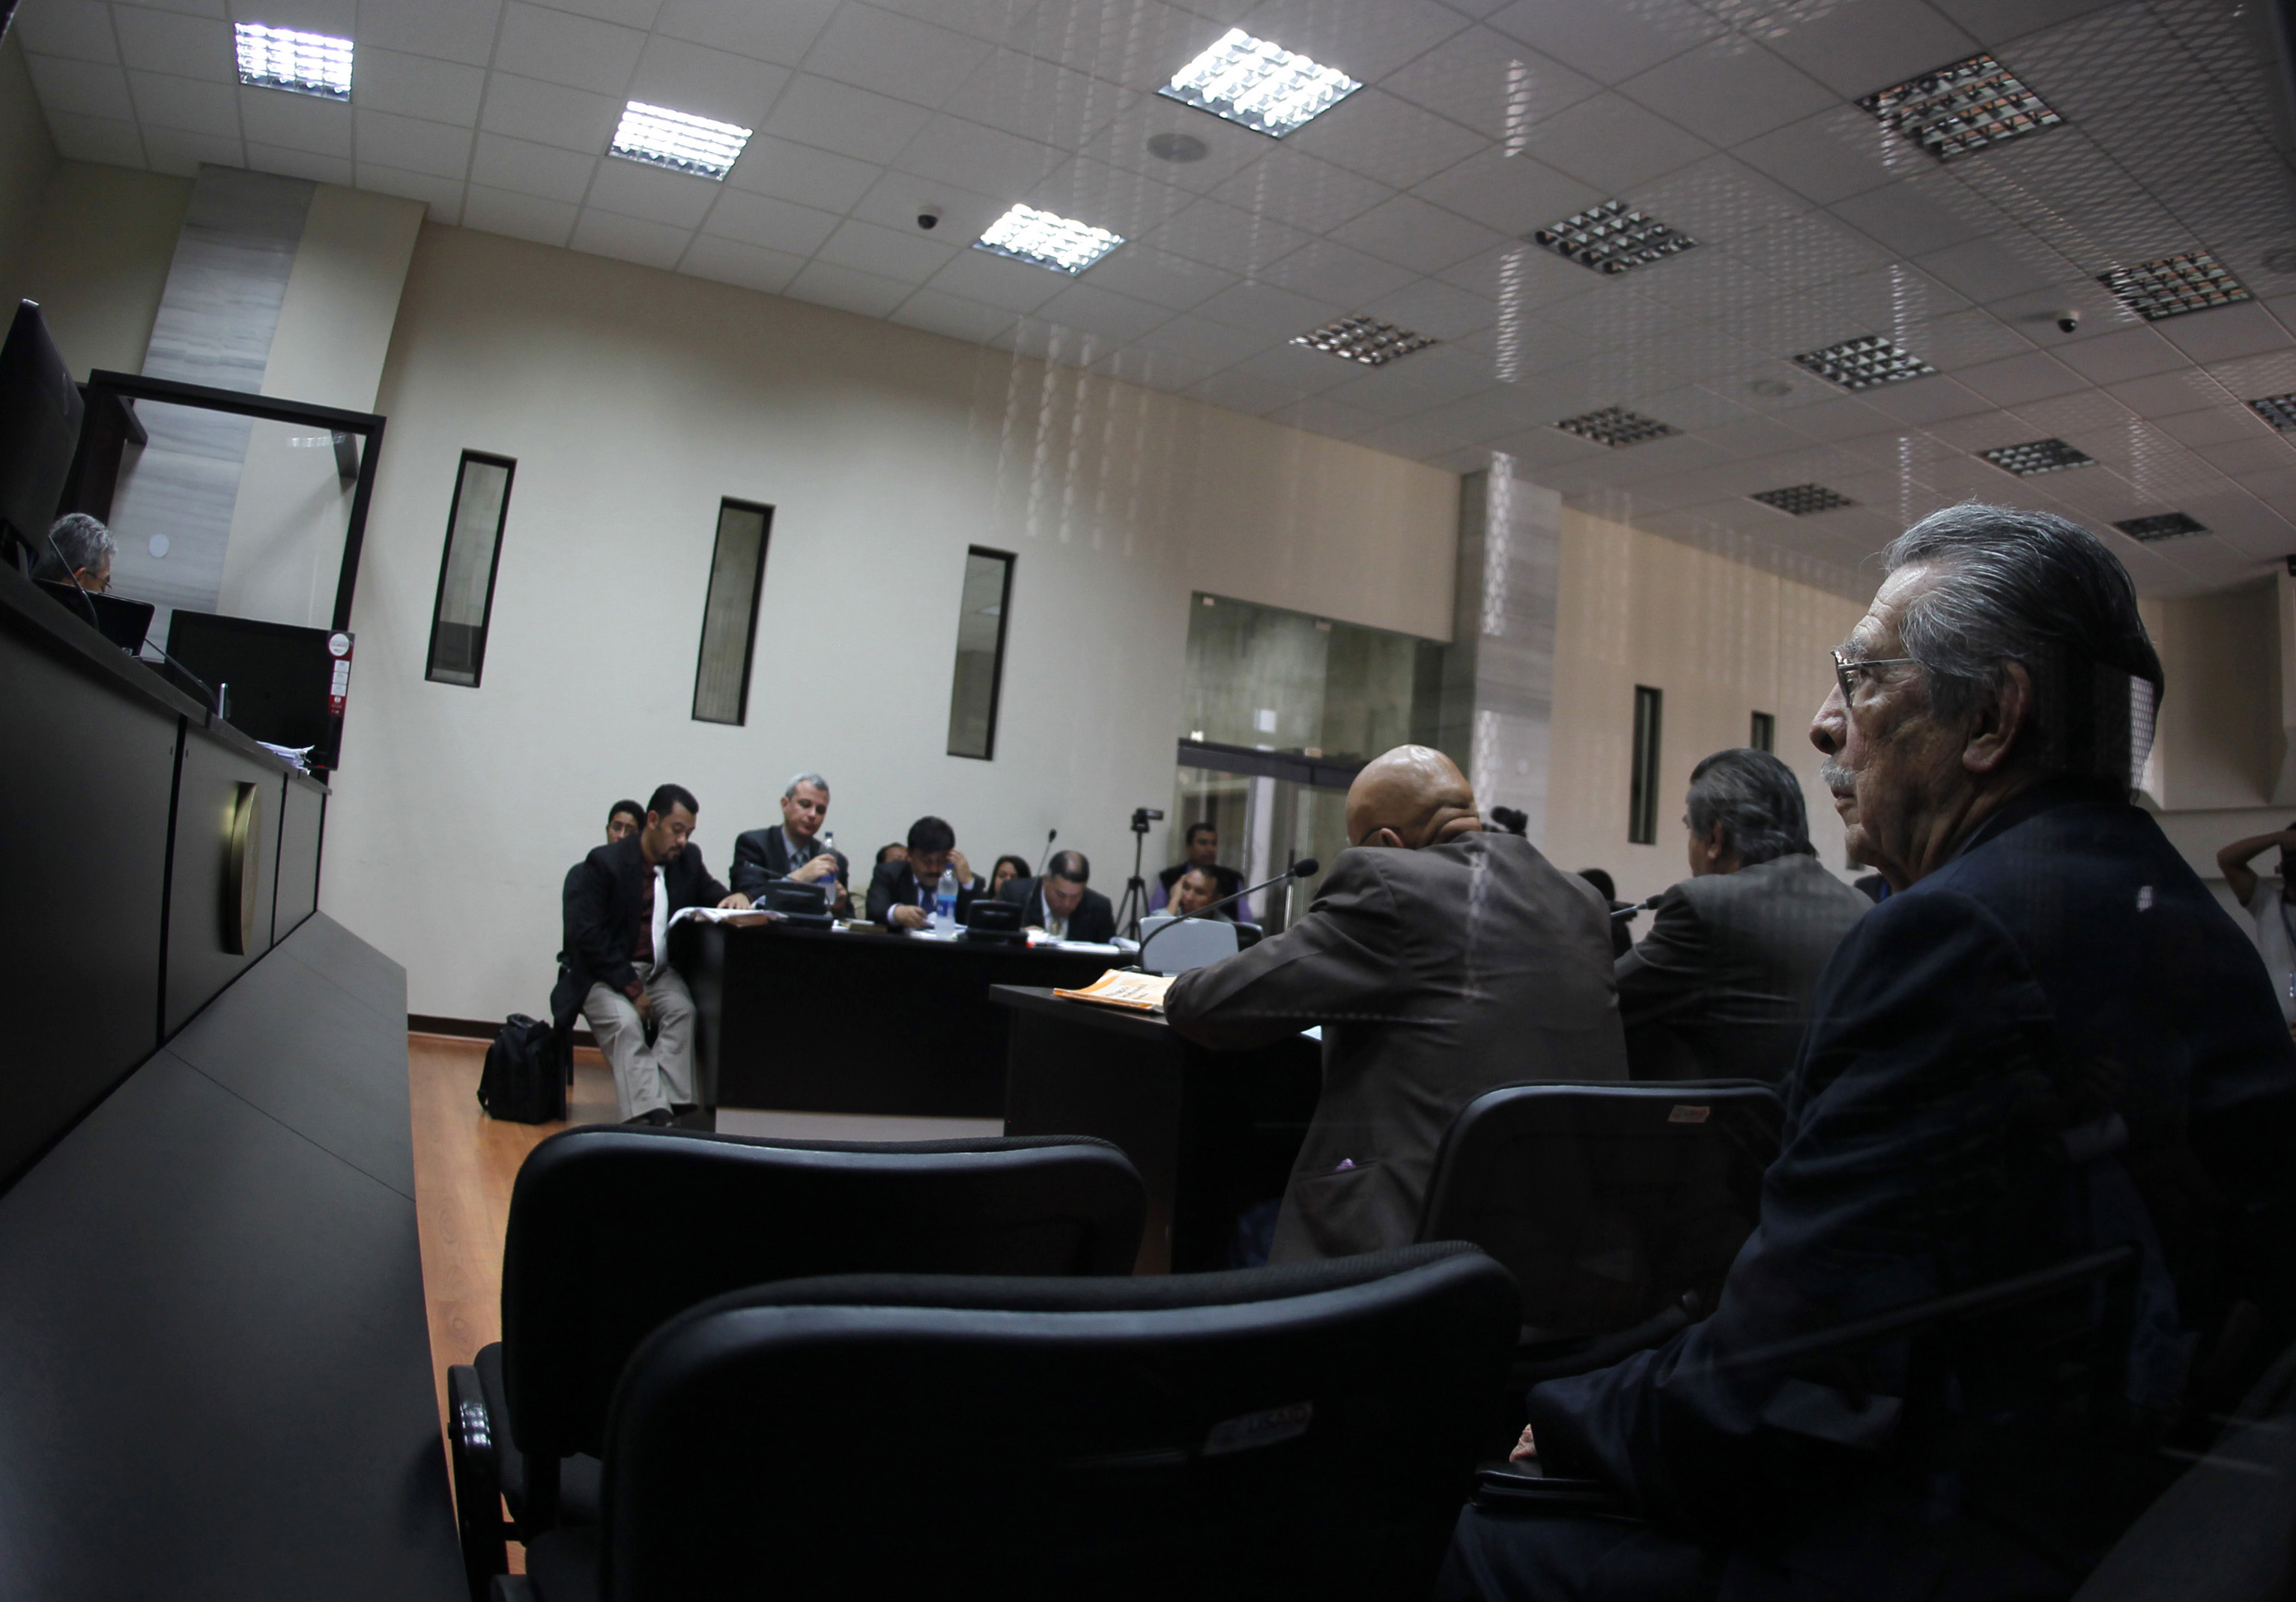 Former Guatemalan dictator Rios Montt sits during a hearing of his trial, in the Supreme Court of Justice in Guatemala City